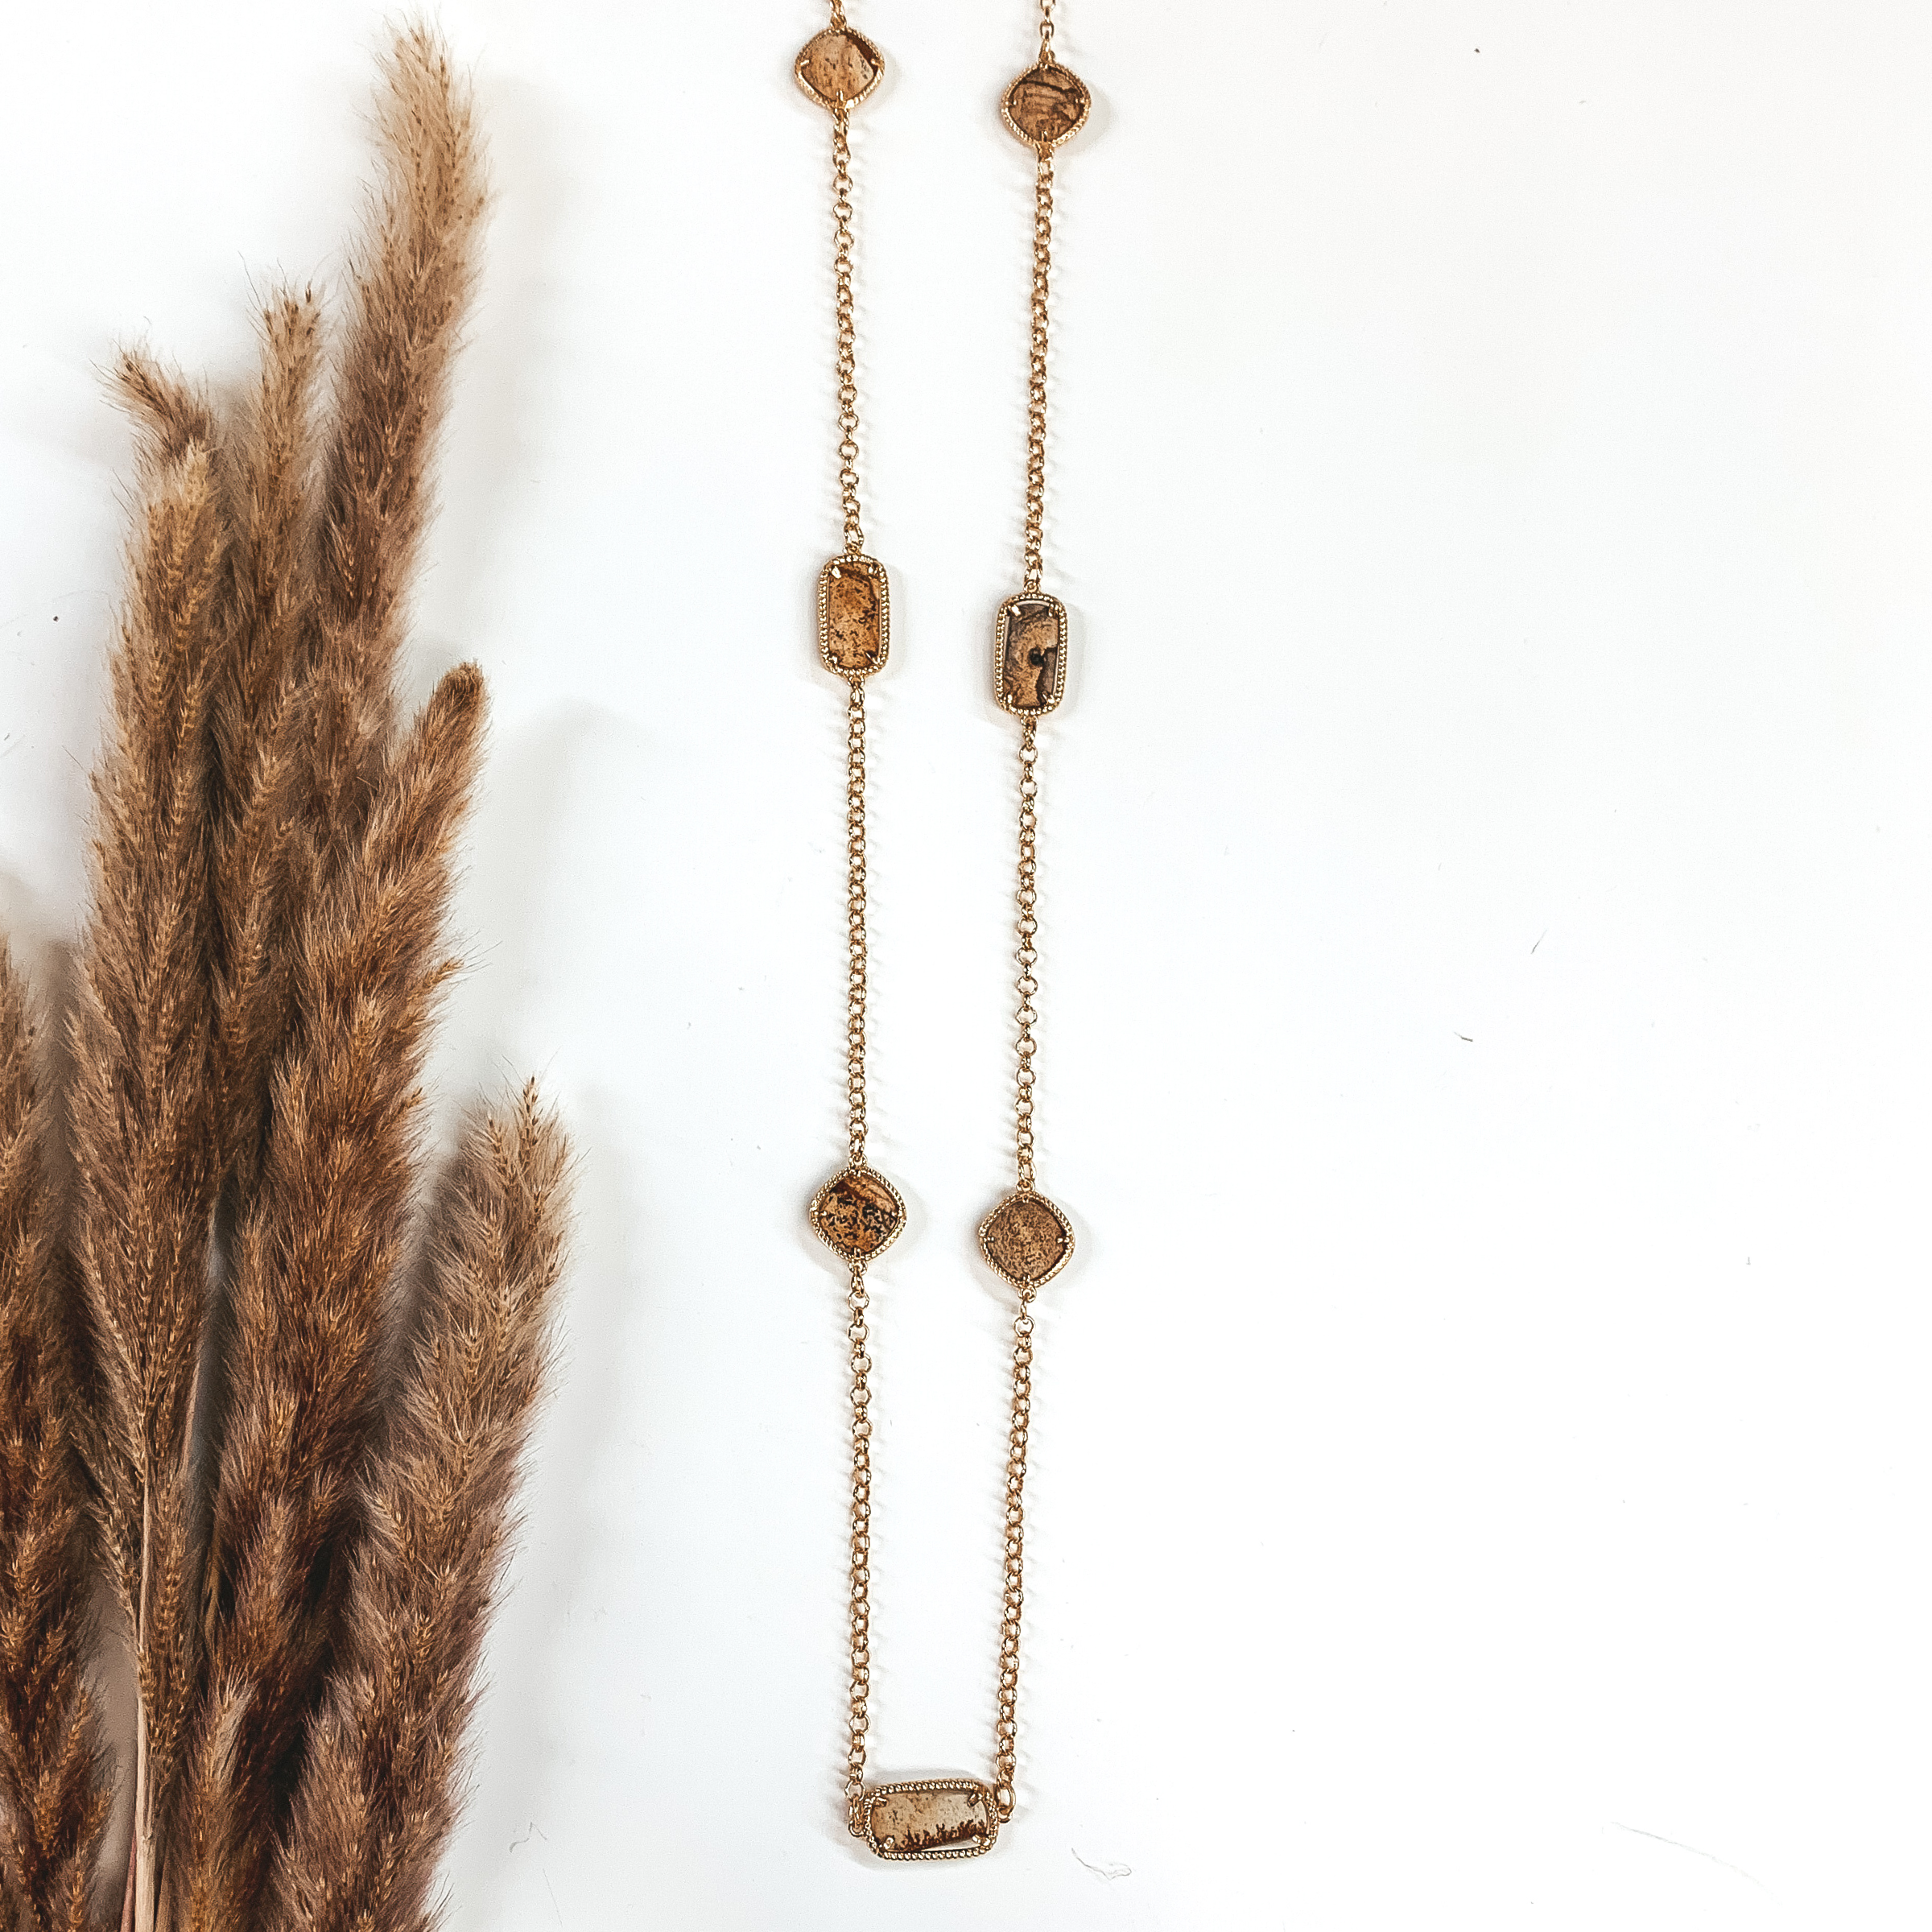 mixed brown stones on a long gold necklace